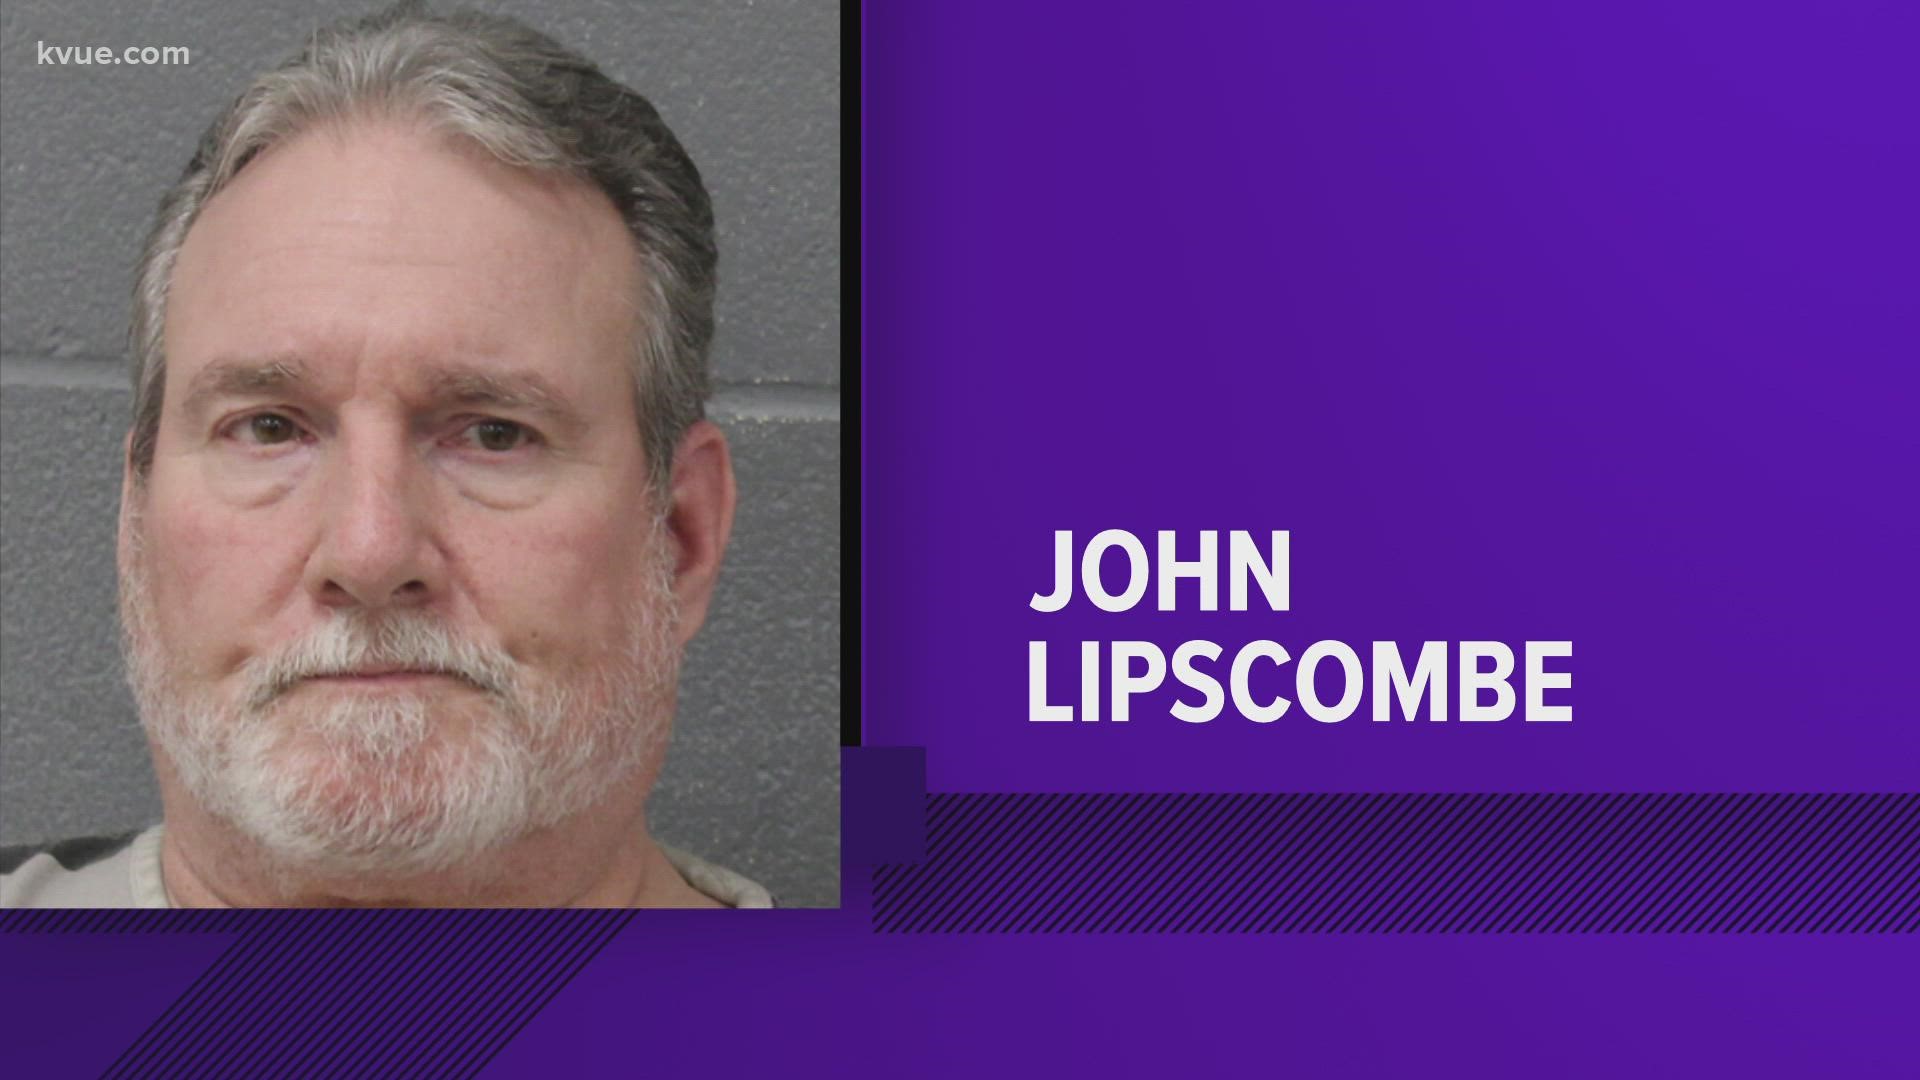 Judge John Lipscombe was booked into the Travis County Jail around 9 a.m. on Saturday after his arrest near The Domain.